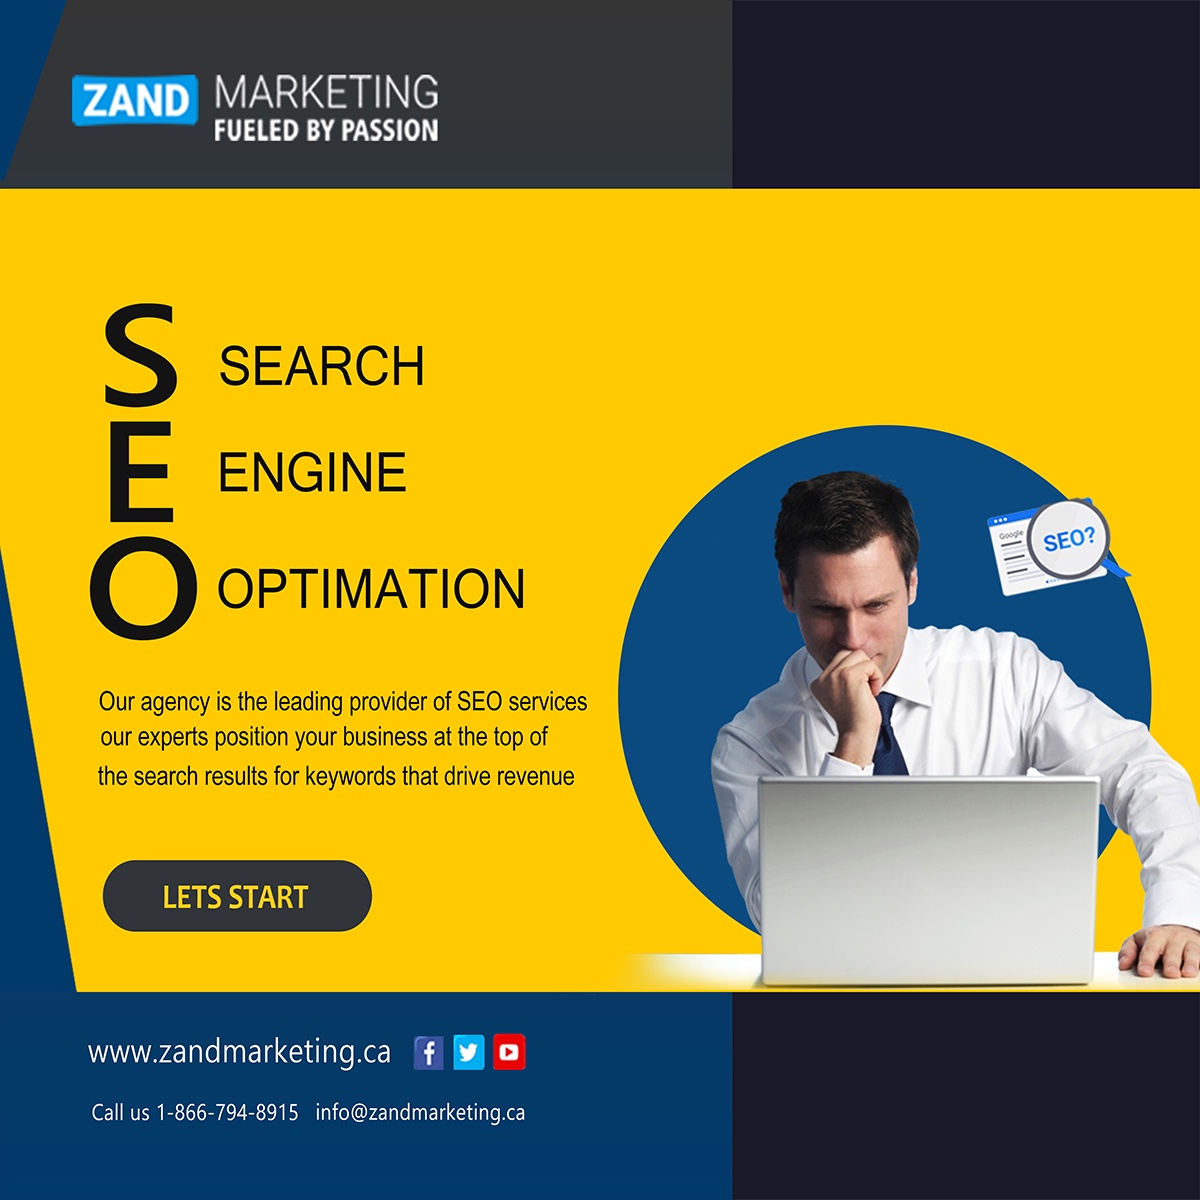 Finding Out How SEO Helps You to Grow Your Business